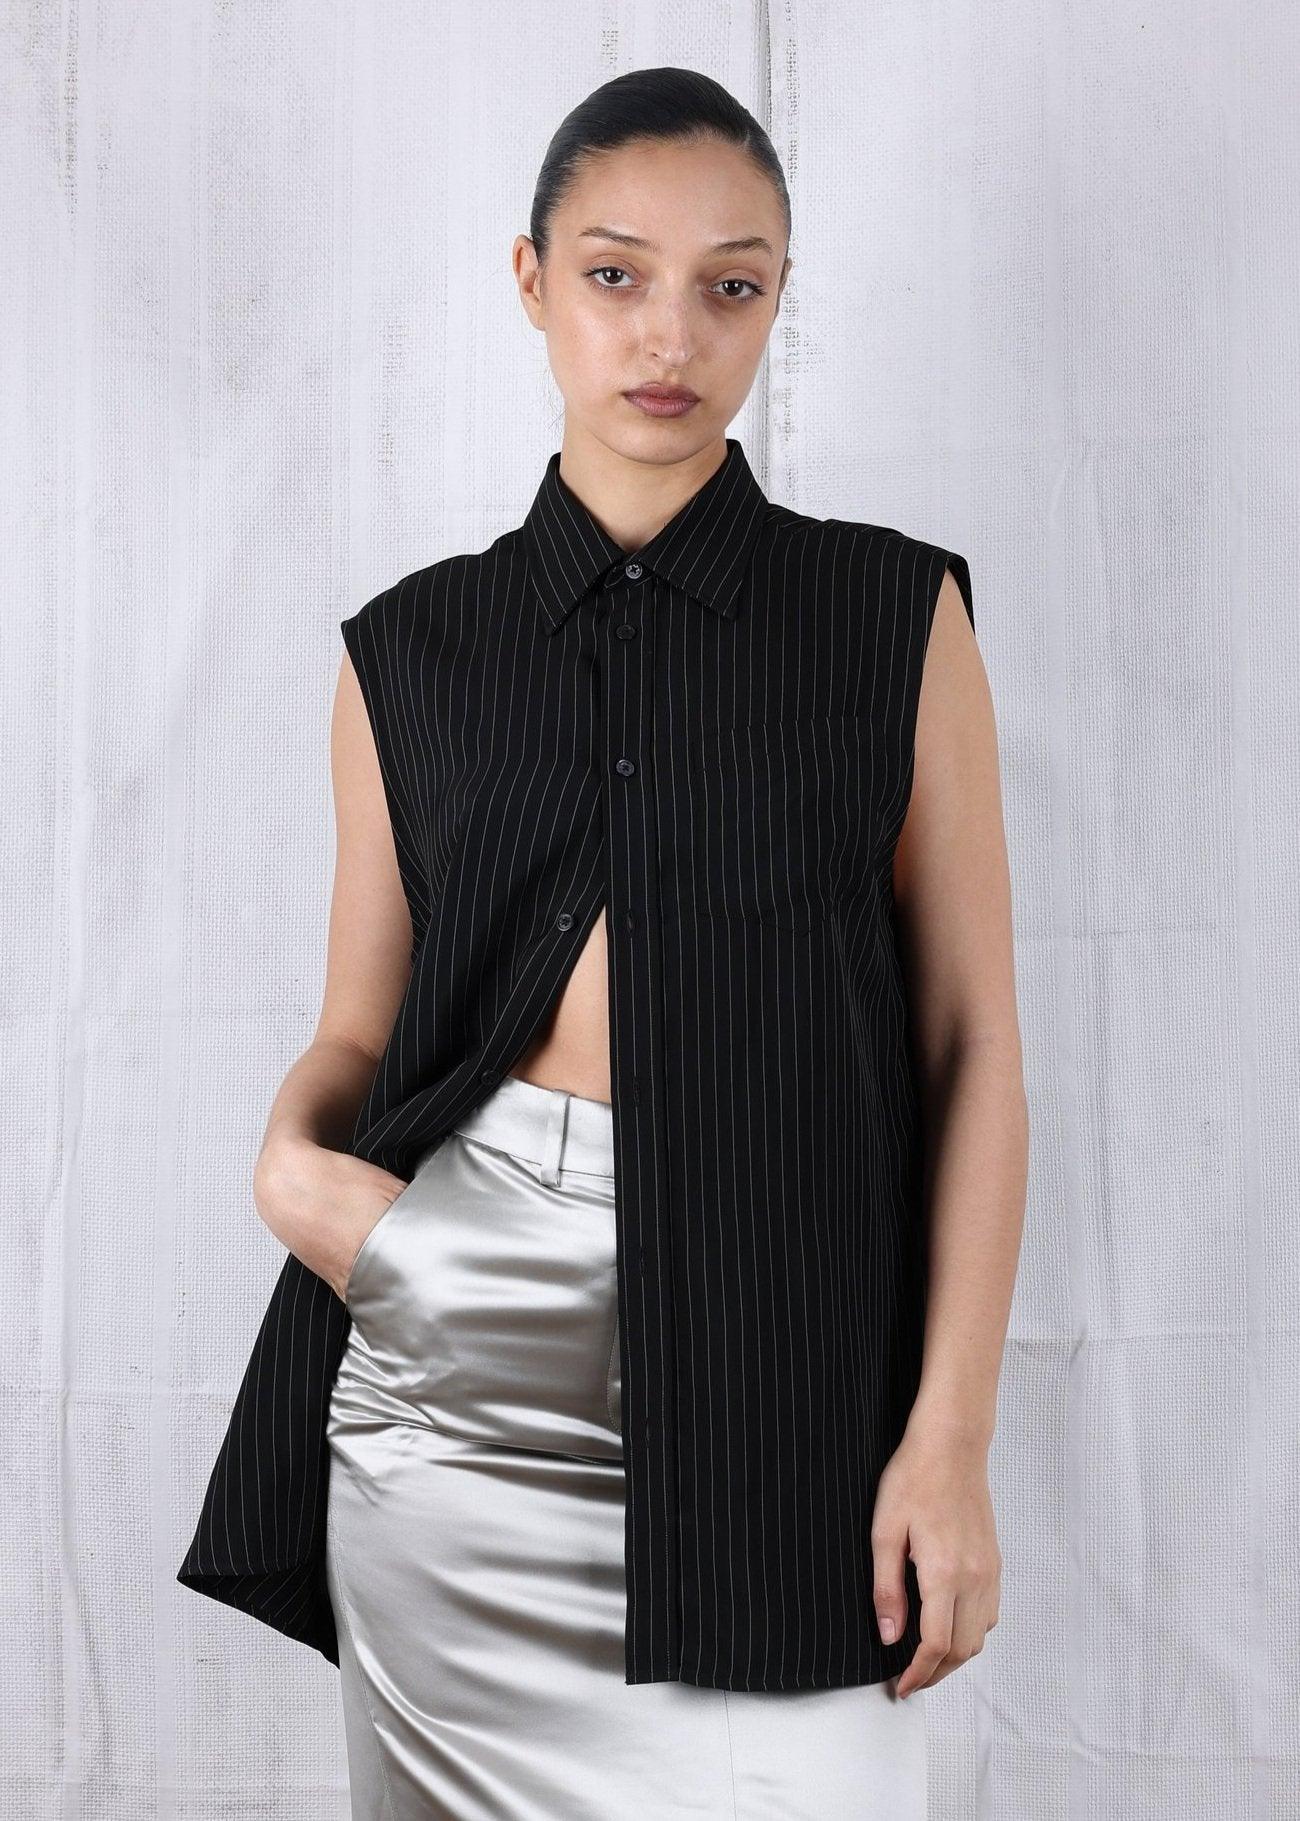 Alexander McQueen for Givenchy pinstripe tunic top - Known Source